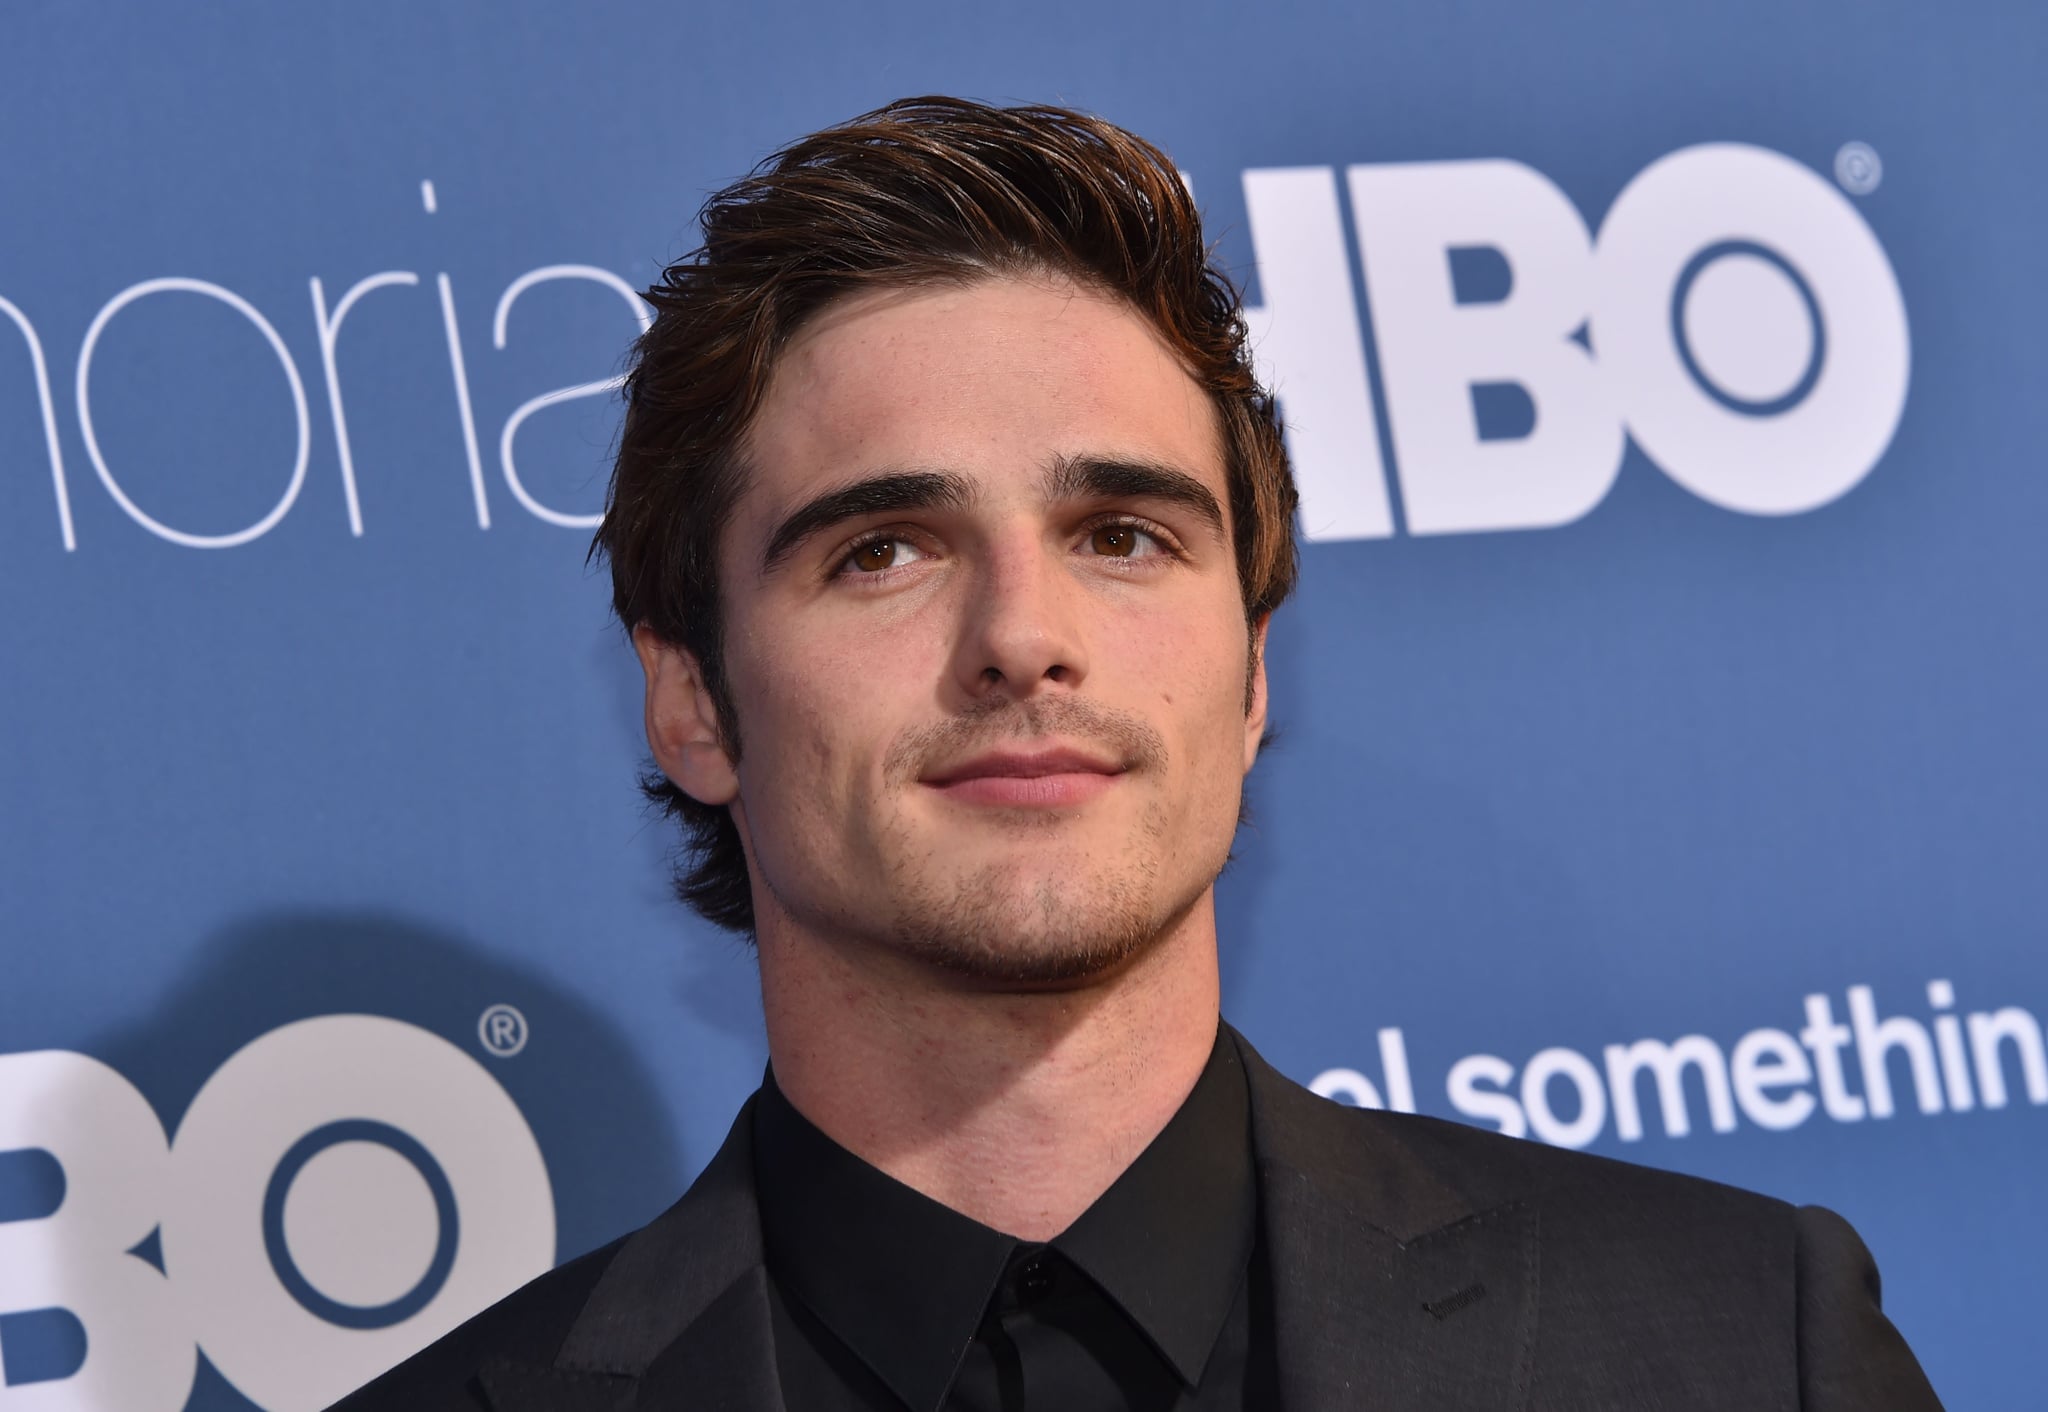 Australian actor Jacob Elordi attends the Los Angeles premiere of the new HBO series